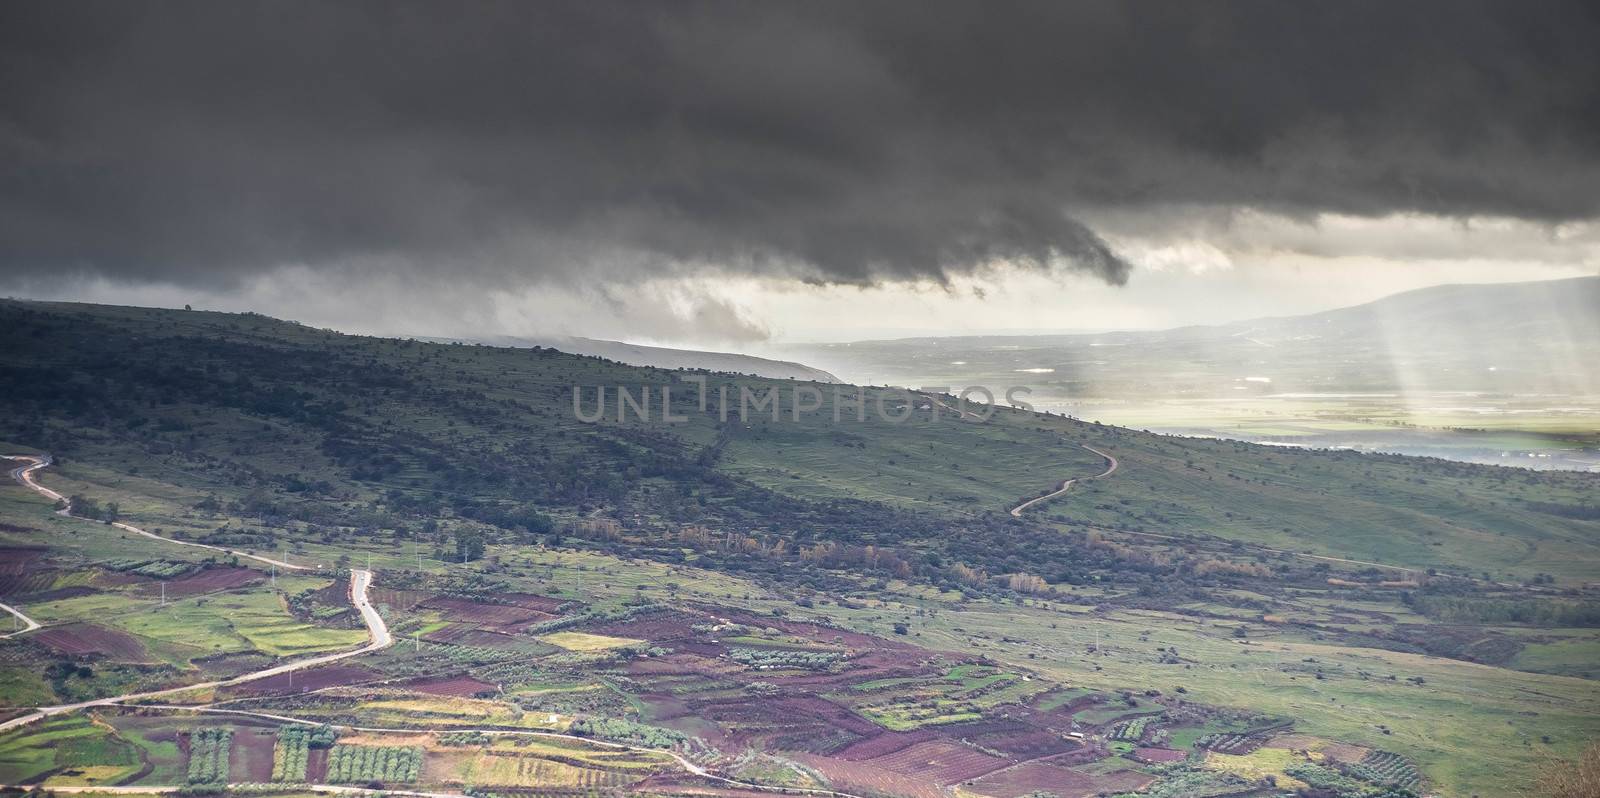 Golan heights in Israel storm winter weather with rain